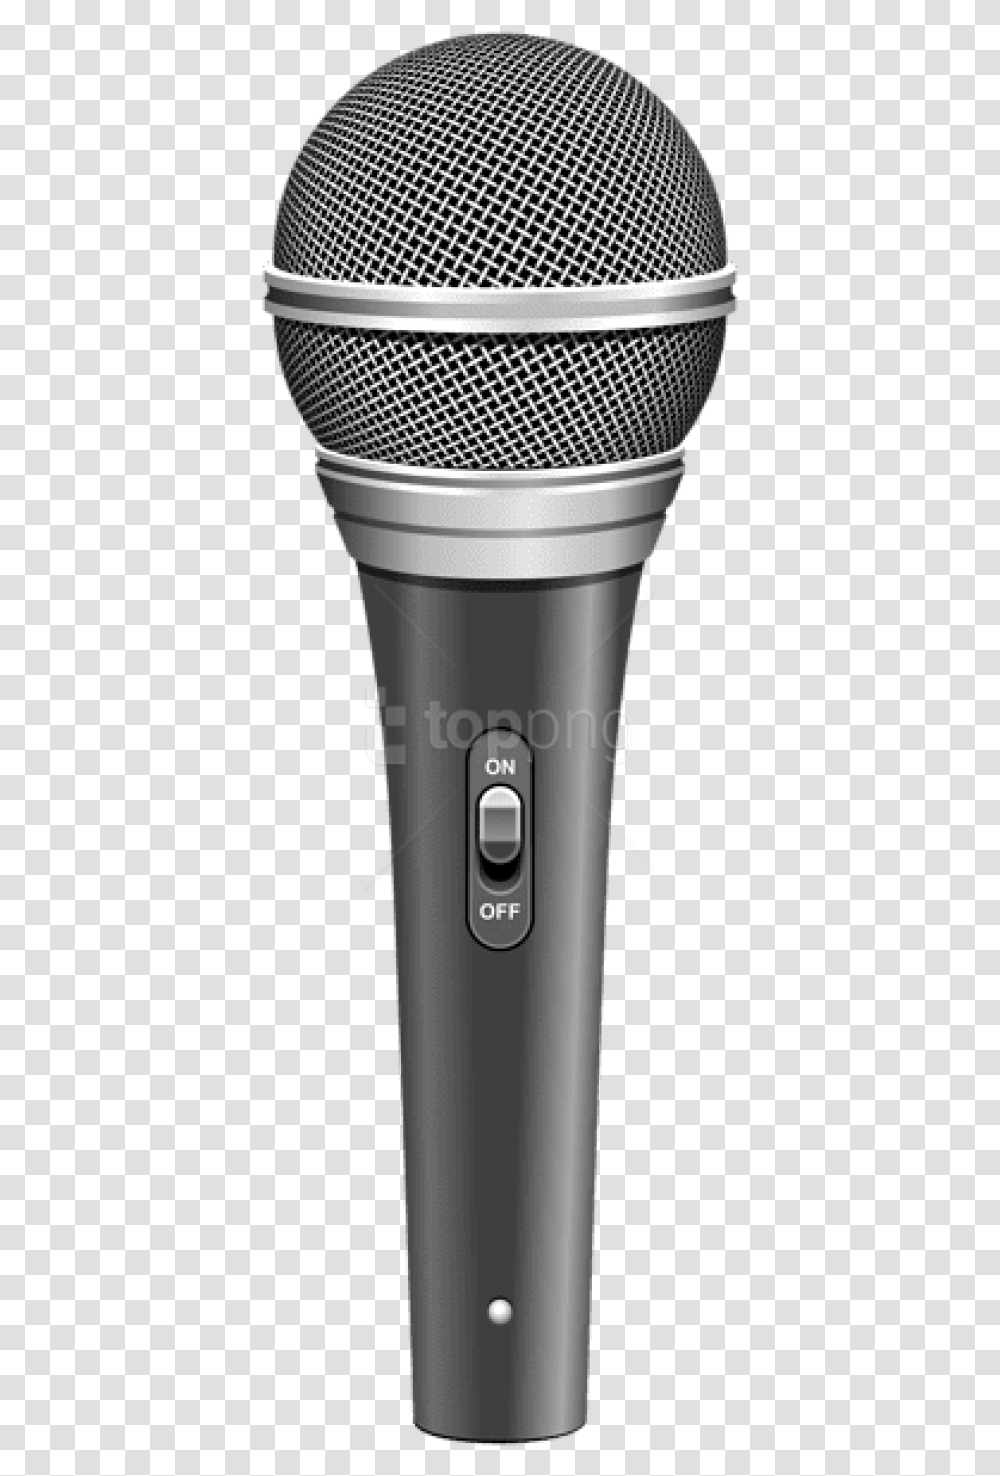 Free Microphone Images Clipart Microphone Clipart, Appliance, Lamp, Light, Electrical Device Transparent Png